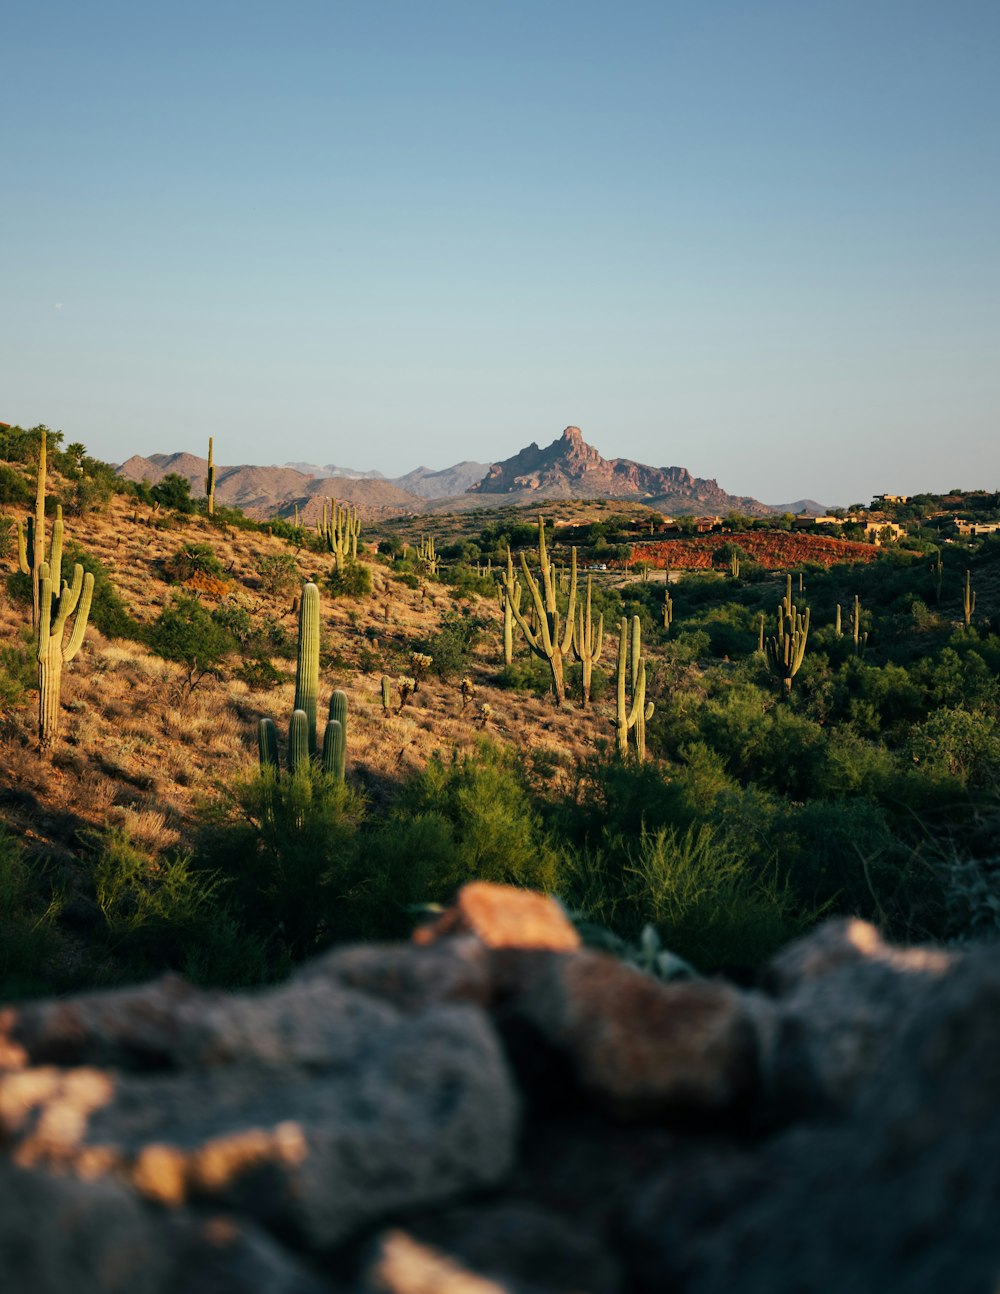 a desert landscape with cactus trees and mountains in the background